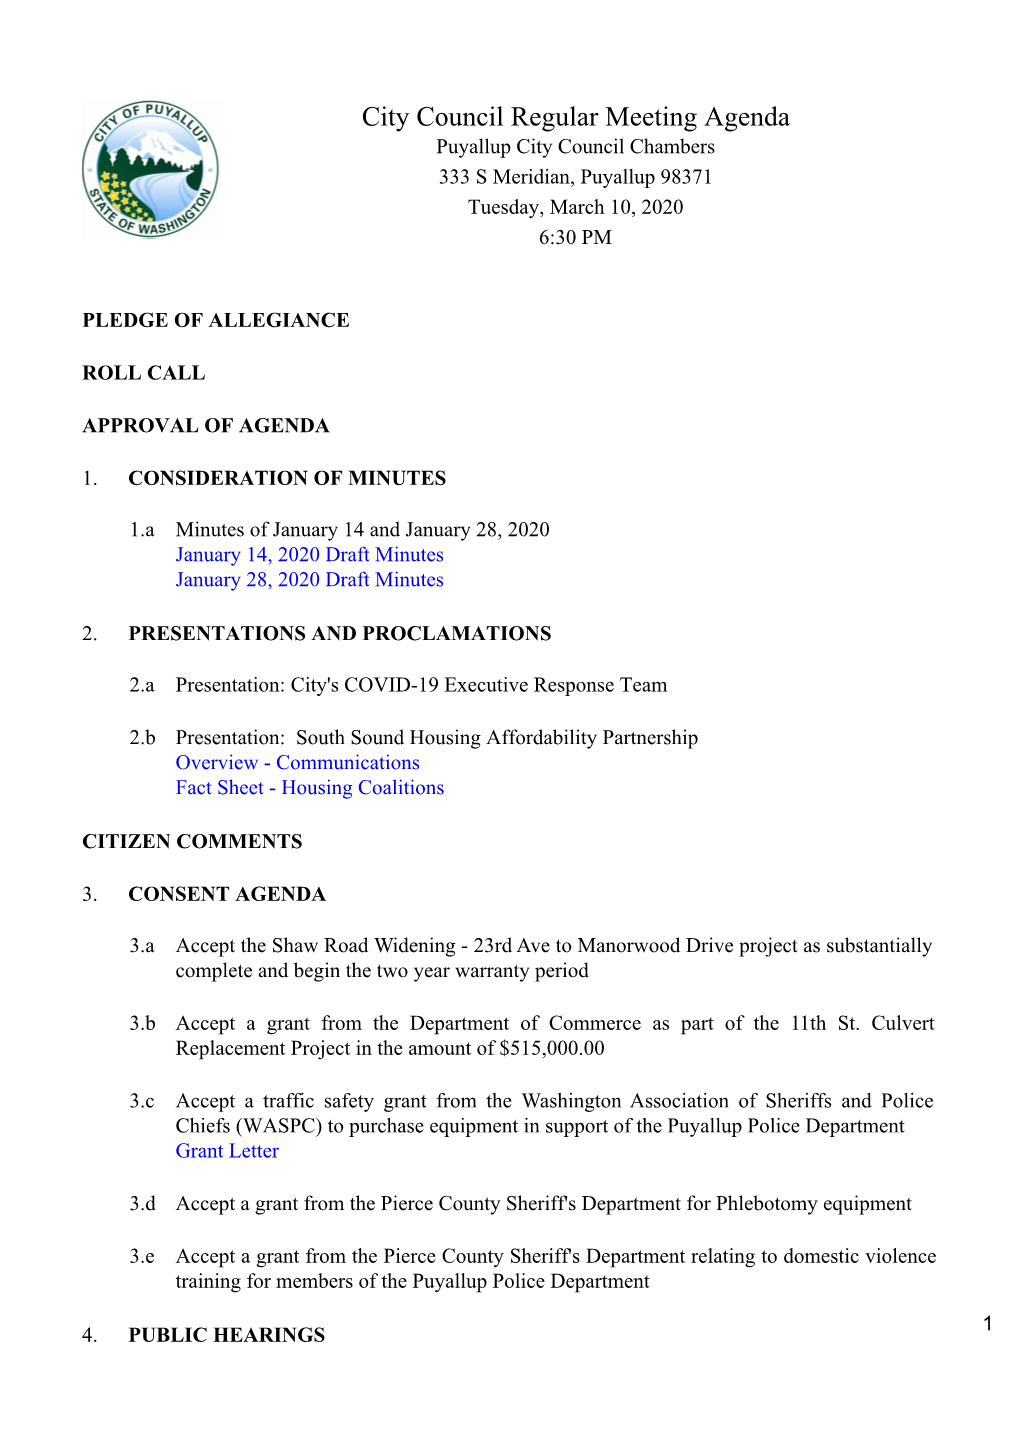 City Council Regular Meeting Agenda Puyallup City Council Chambers 333 S Meridian, Puyallup 98371 Tuesday, March 10, 2020 6:30 PM